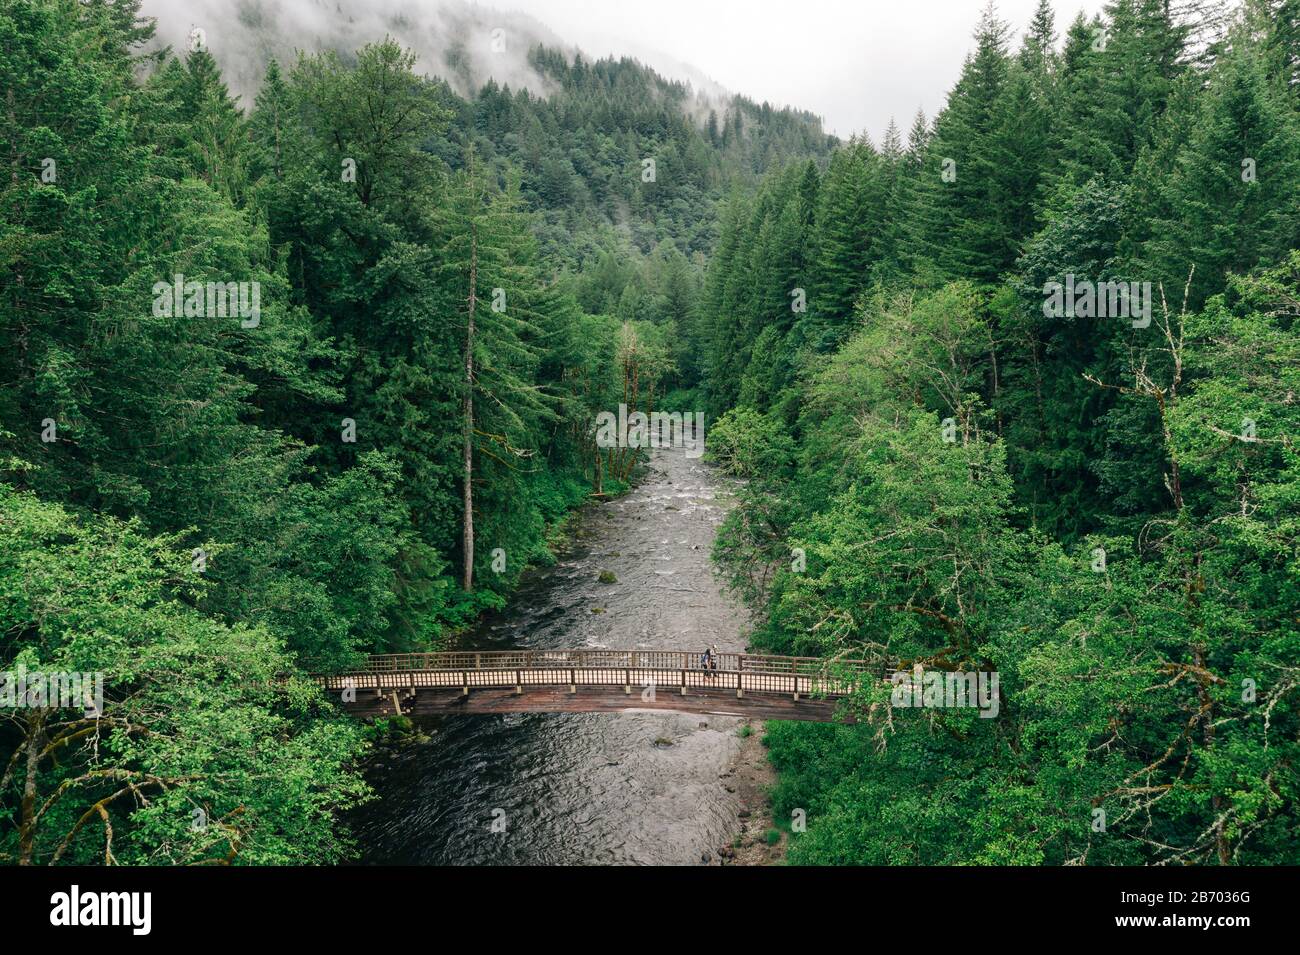 A young couple enjoys a hike on a bridge in the Pacific Northwest. Stock Photo